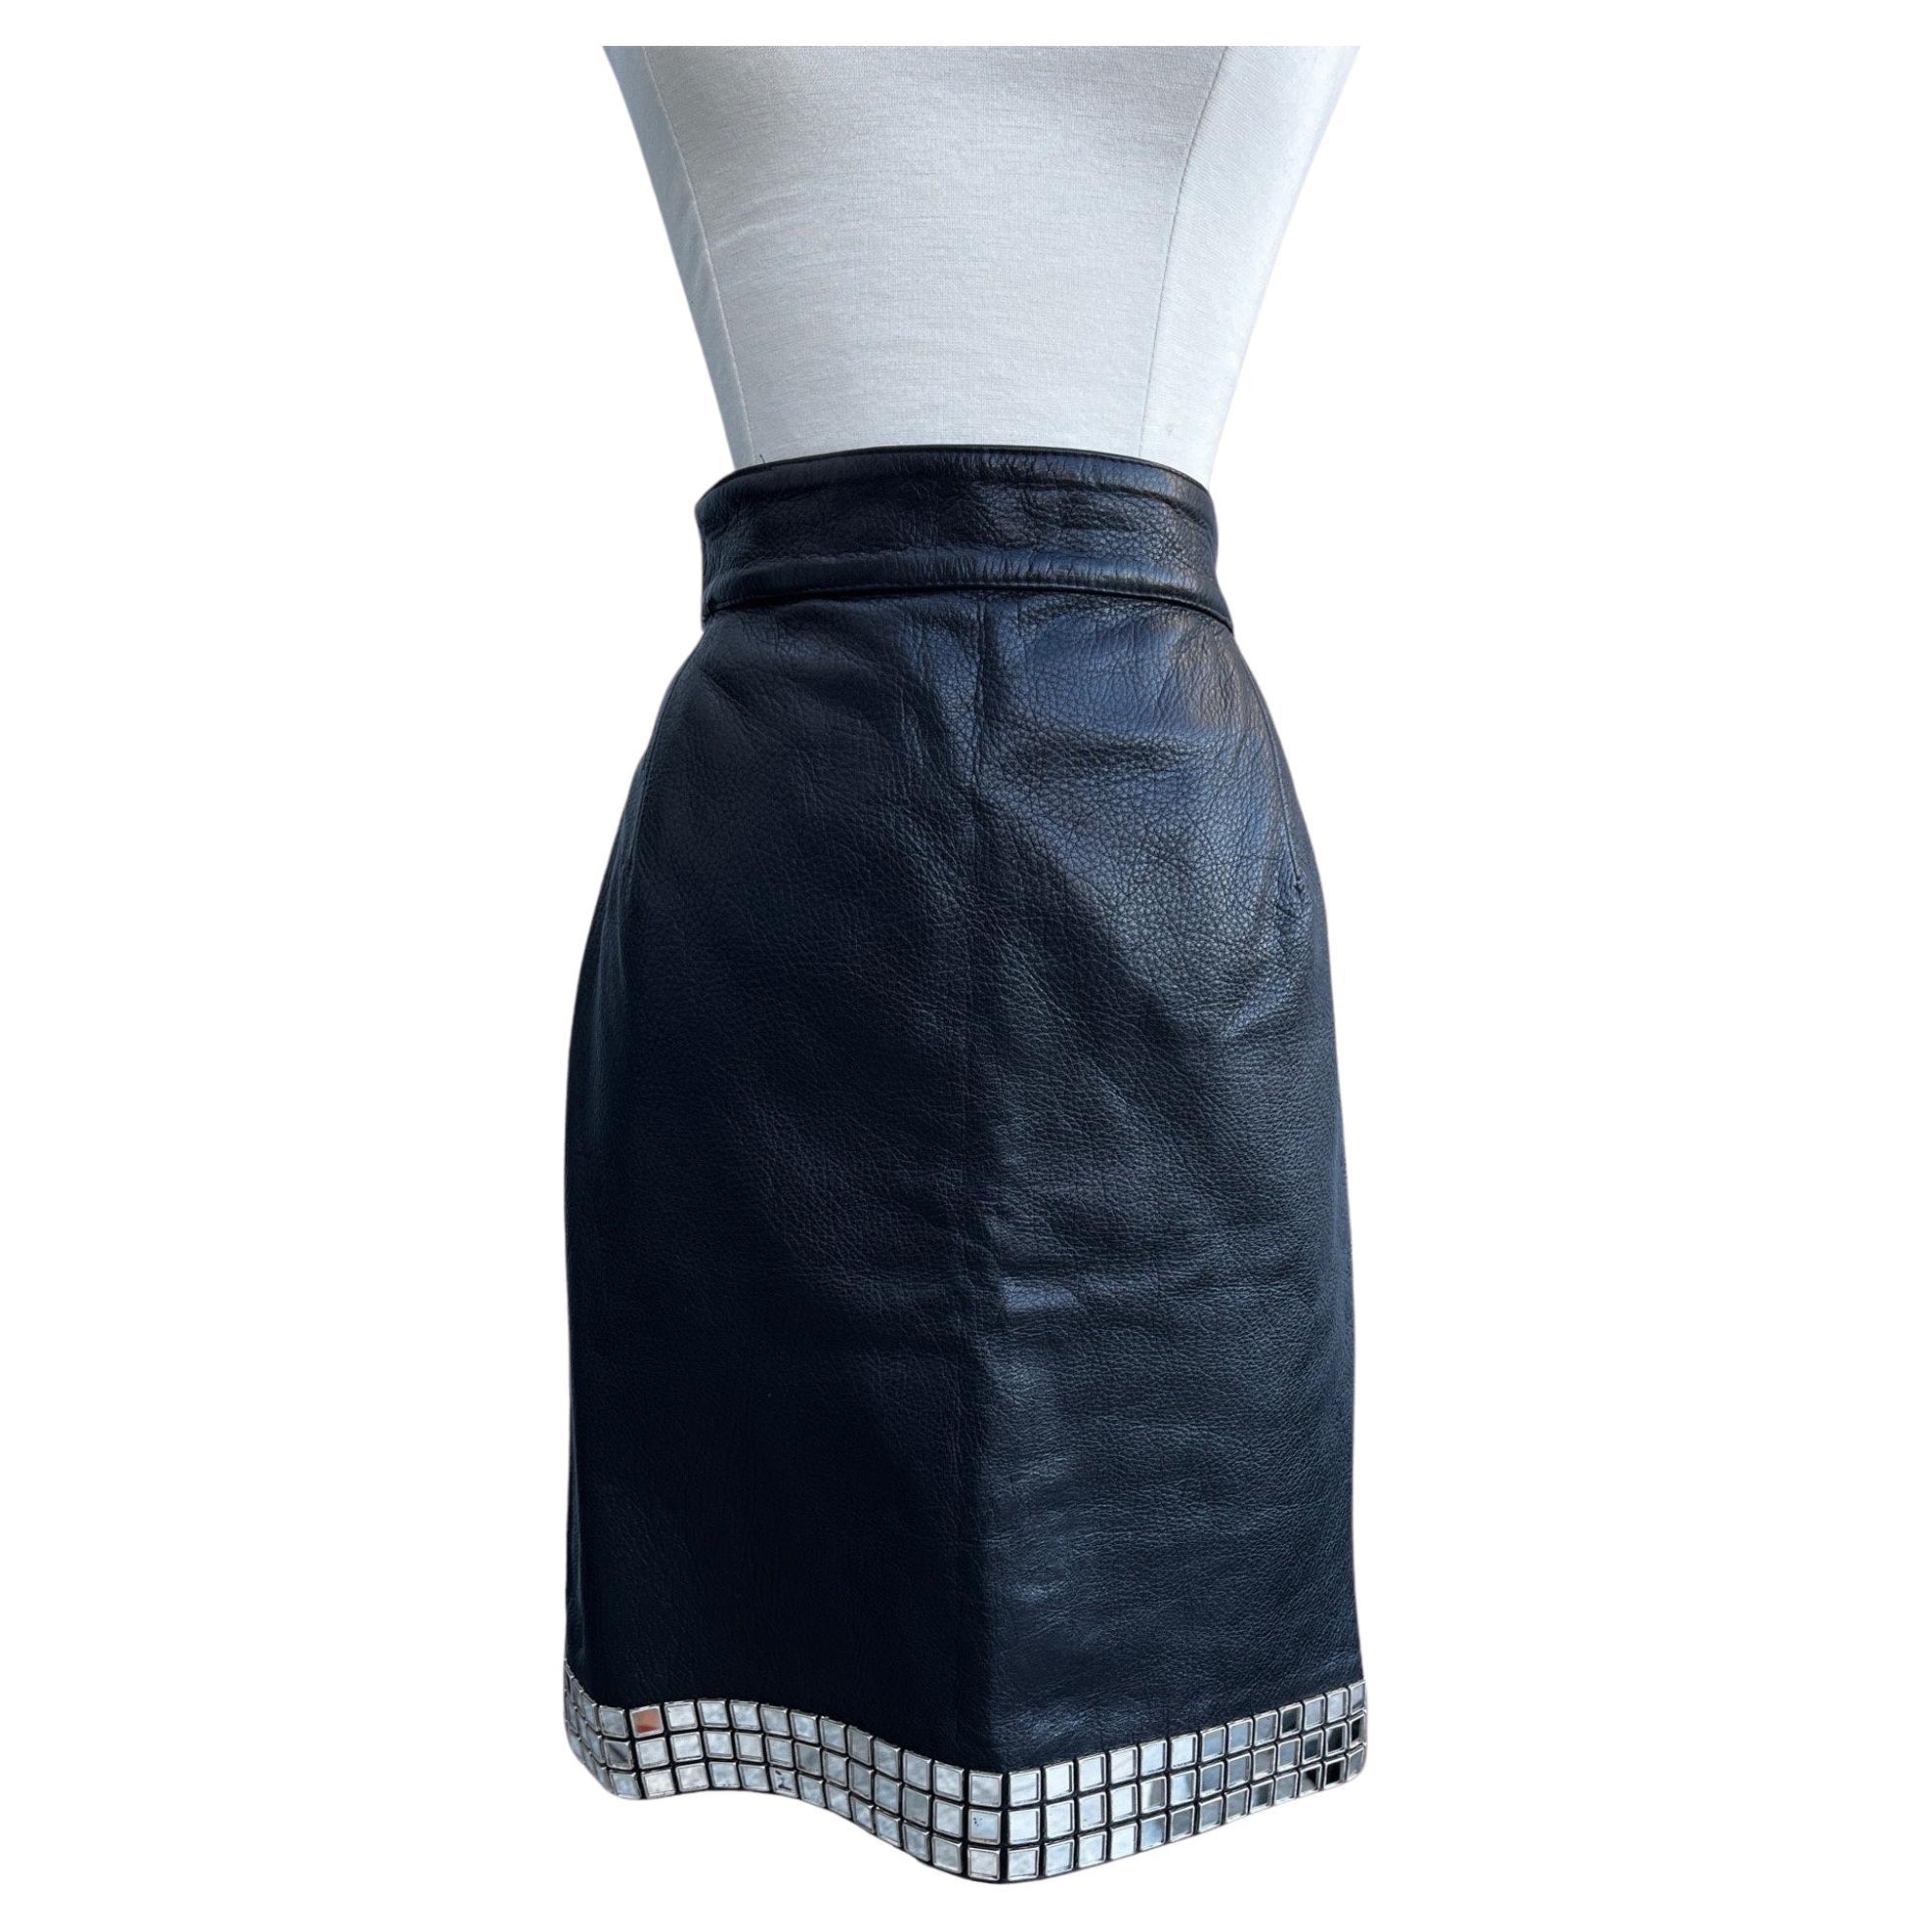 Moschino Black Leather Mirror Skirt, Circa 1990 For Sale